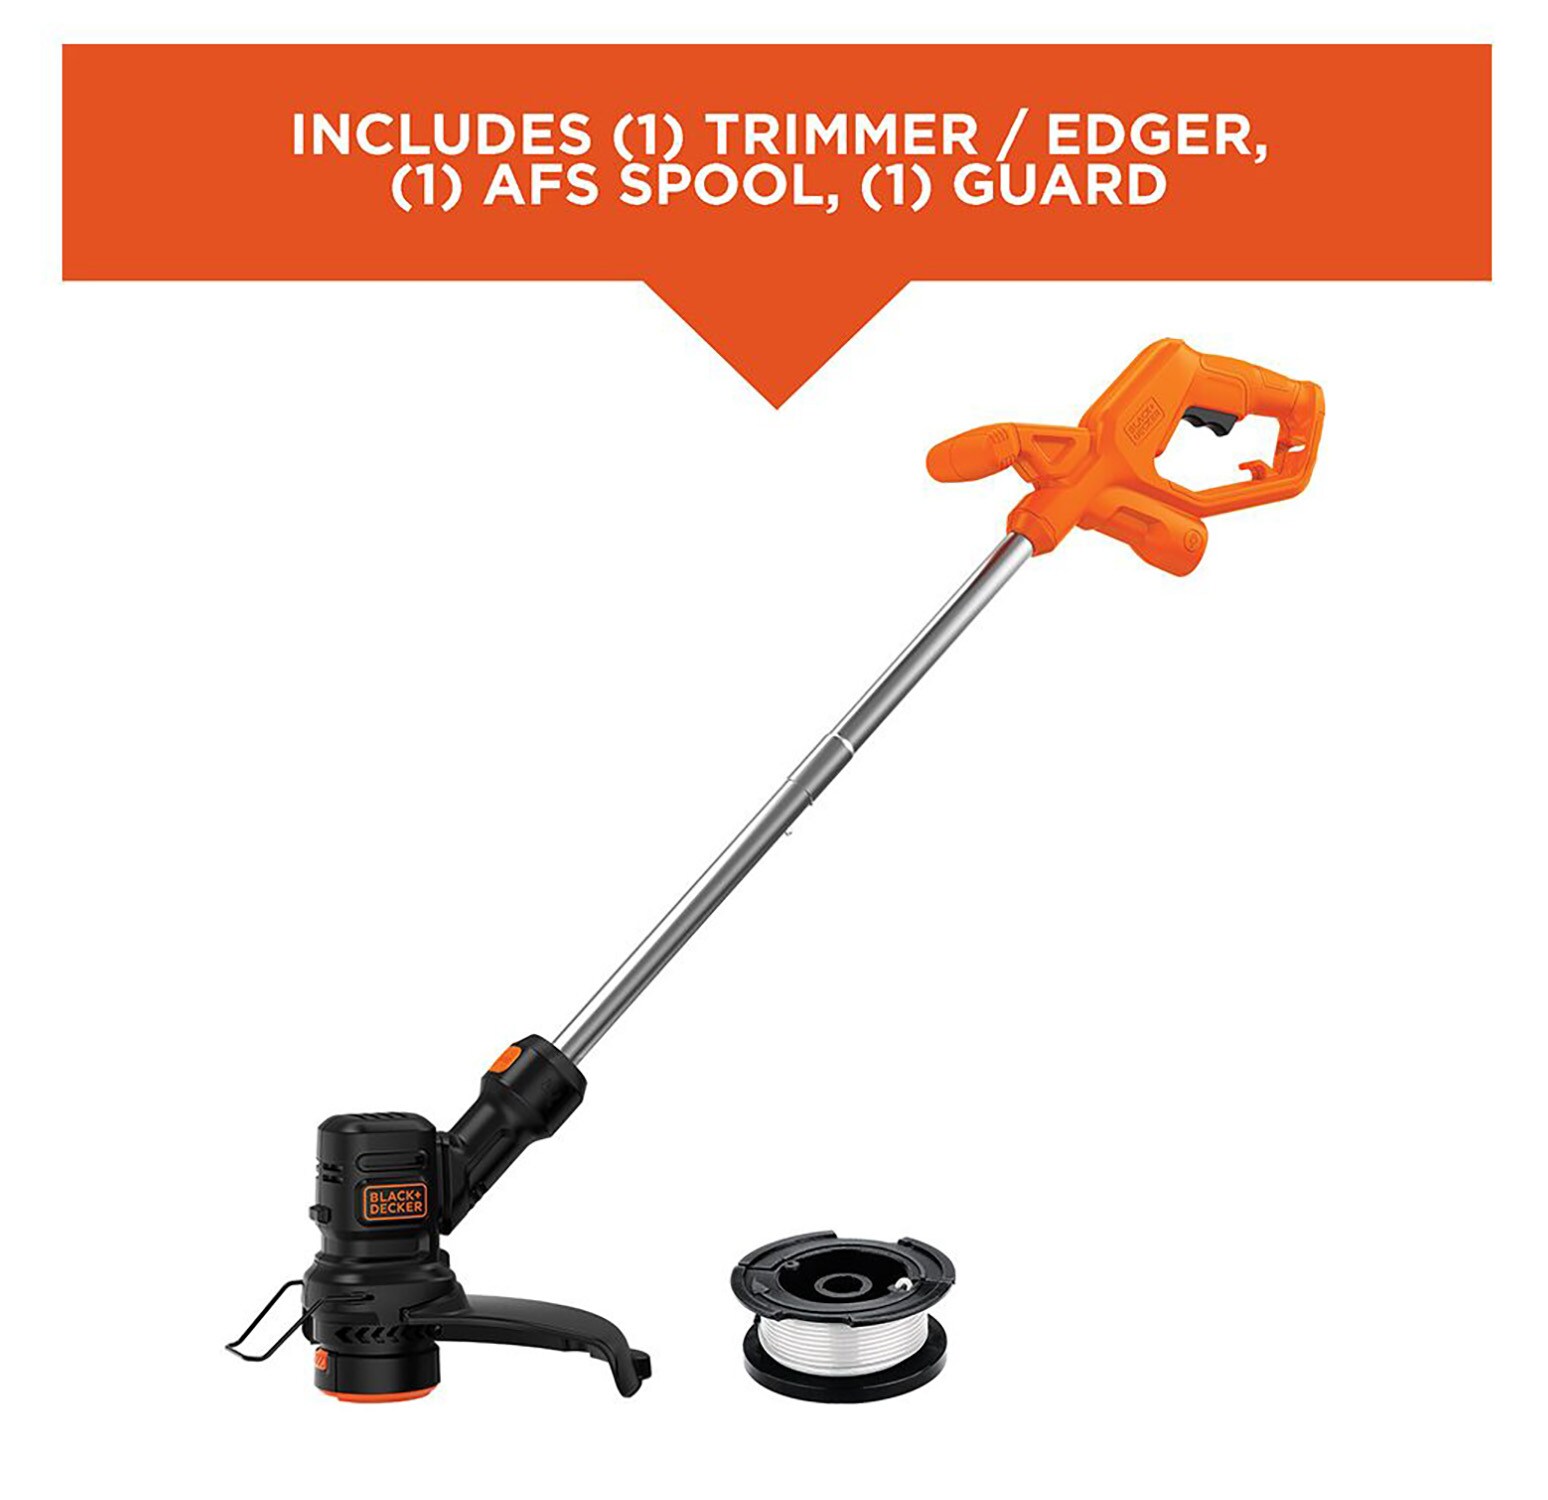 BLACK+DECKER 13-in Straight Shaft Attachment Capable Corded